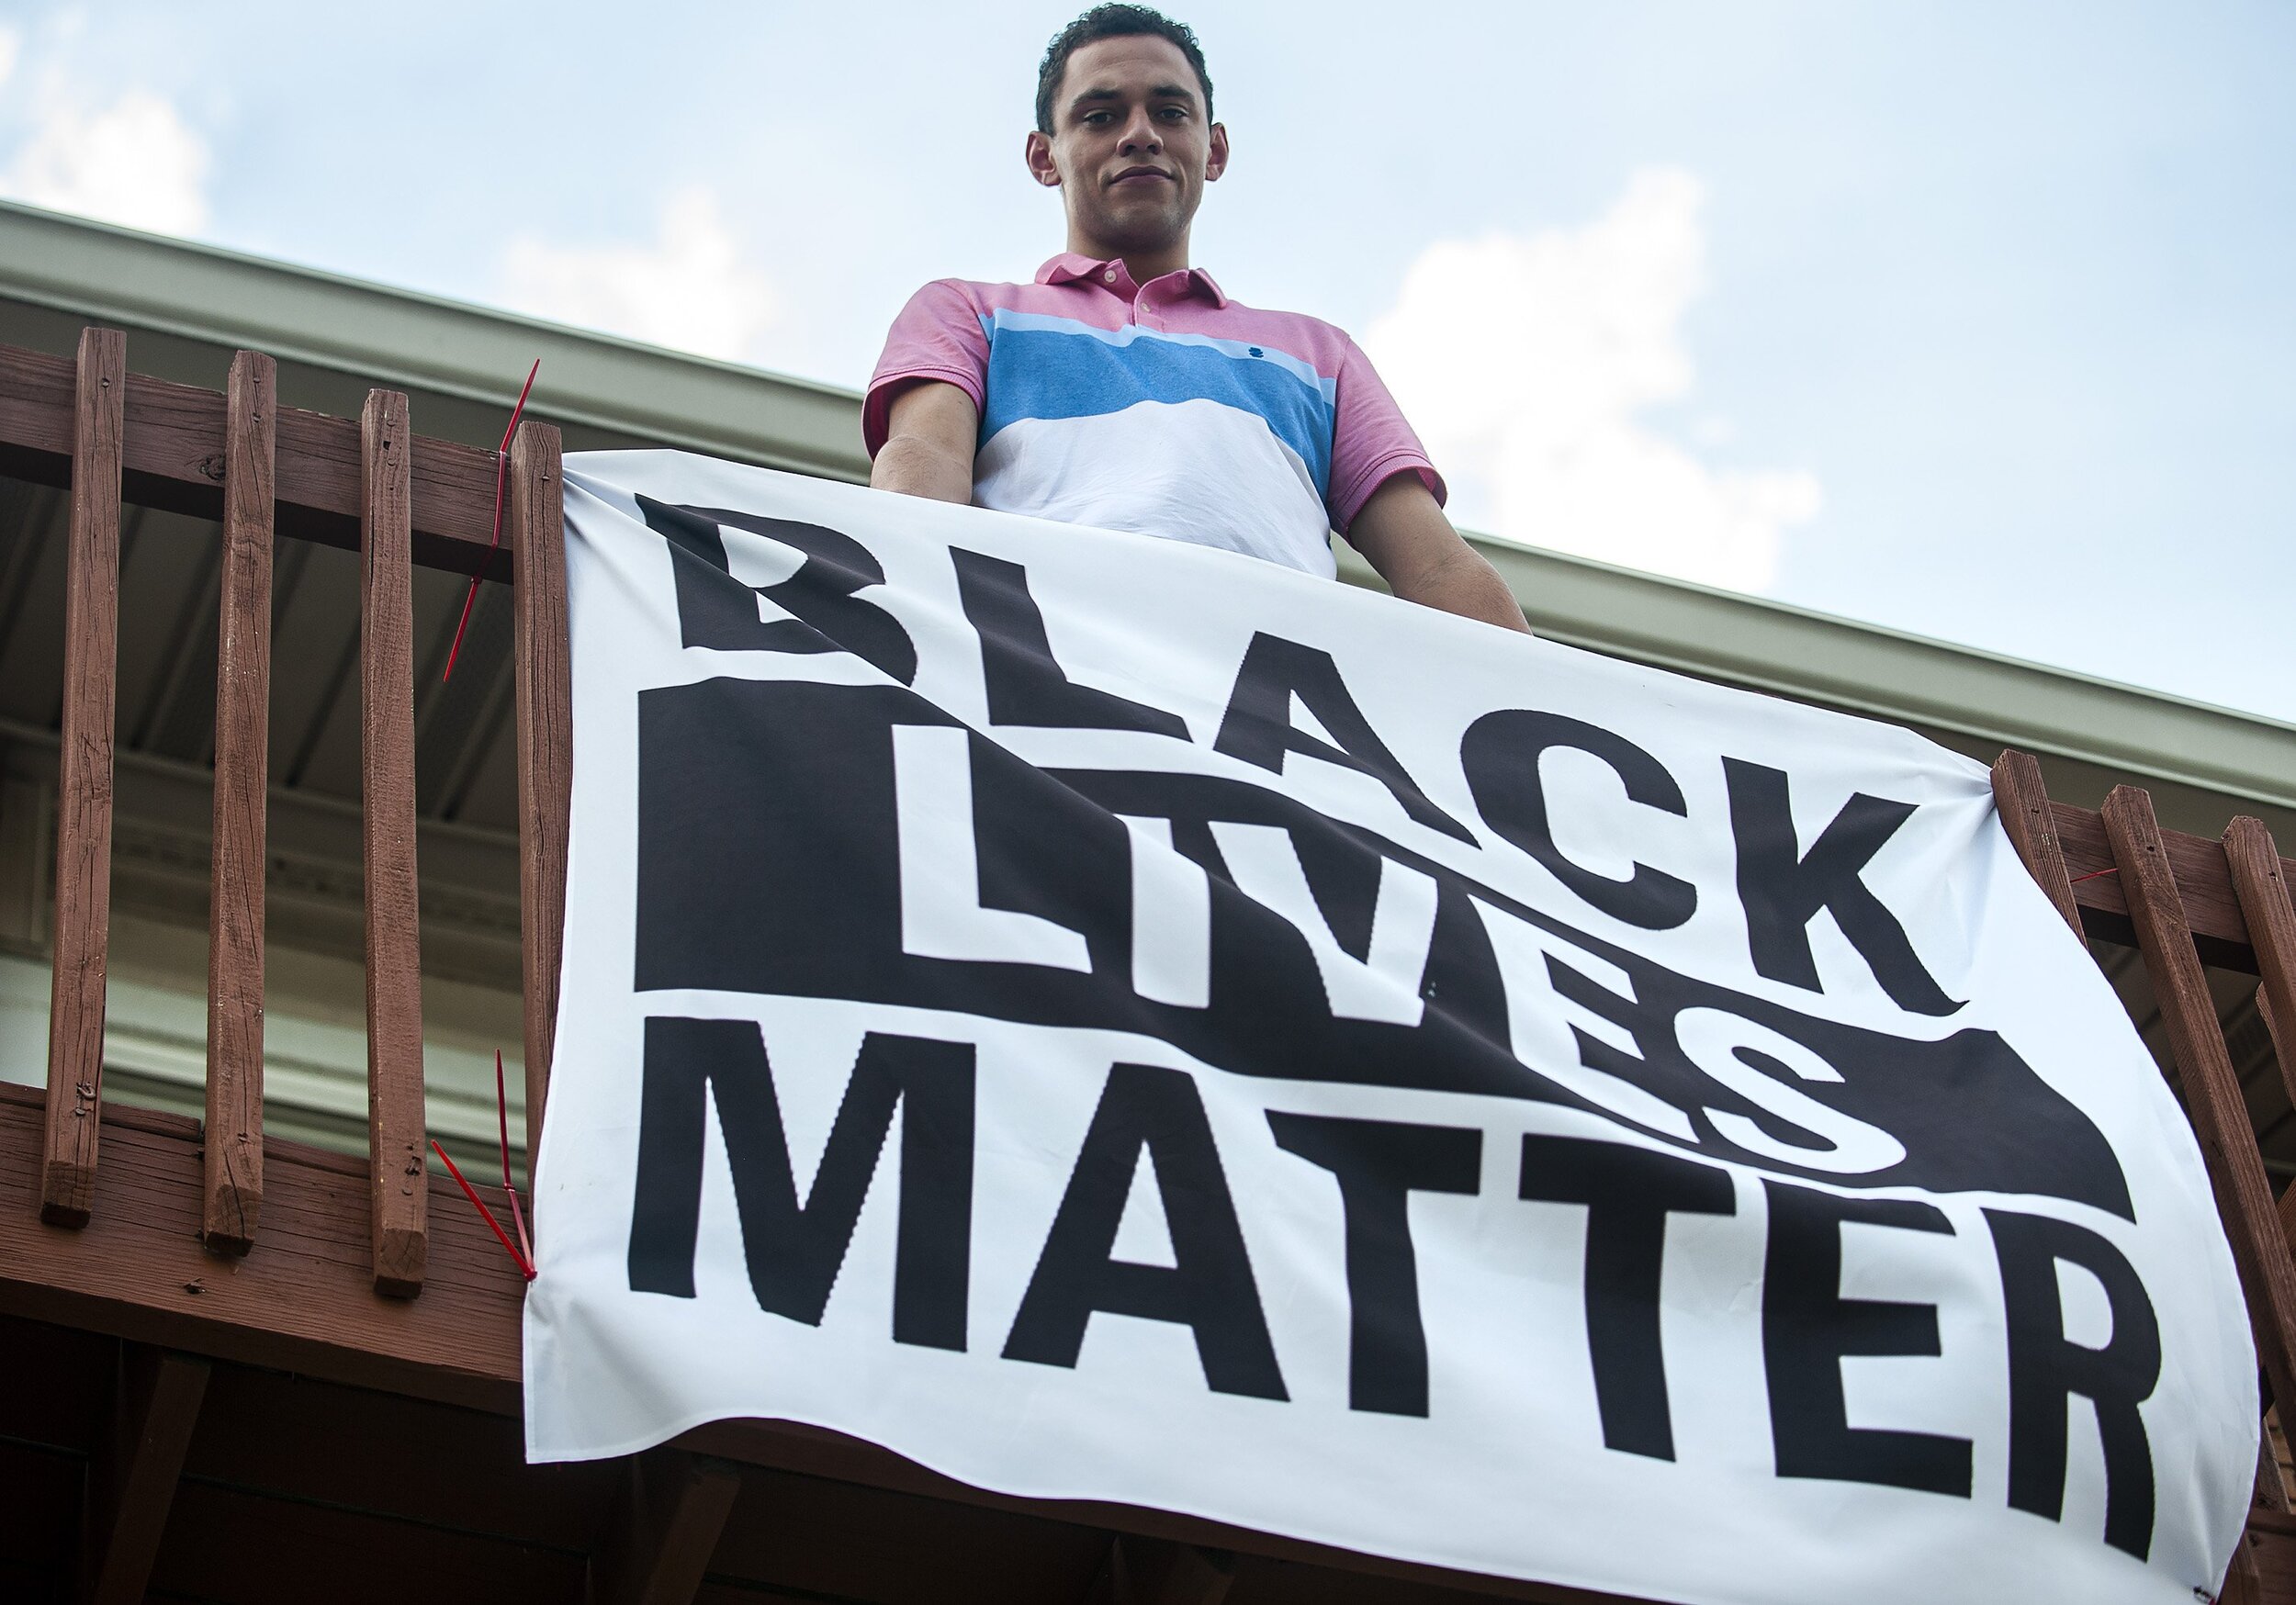  Donavon Burton displays his “Black Lives Matter” flag on the balcony of his apartment in Bloomington, Illinois. Burton has been served an eviction notice from his landlord, First Site Apartments, because he has refused to take down the flag. 